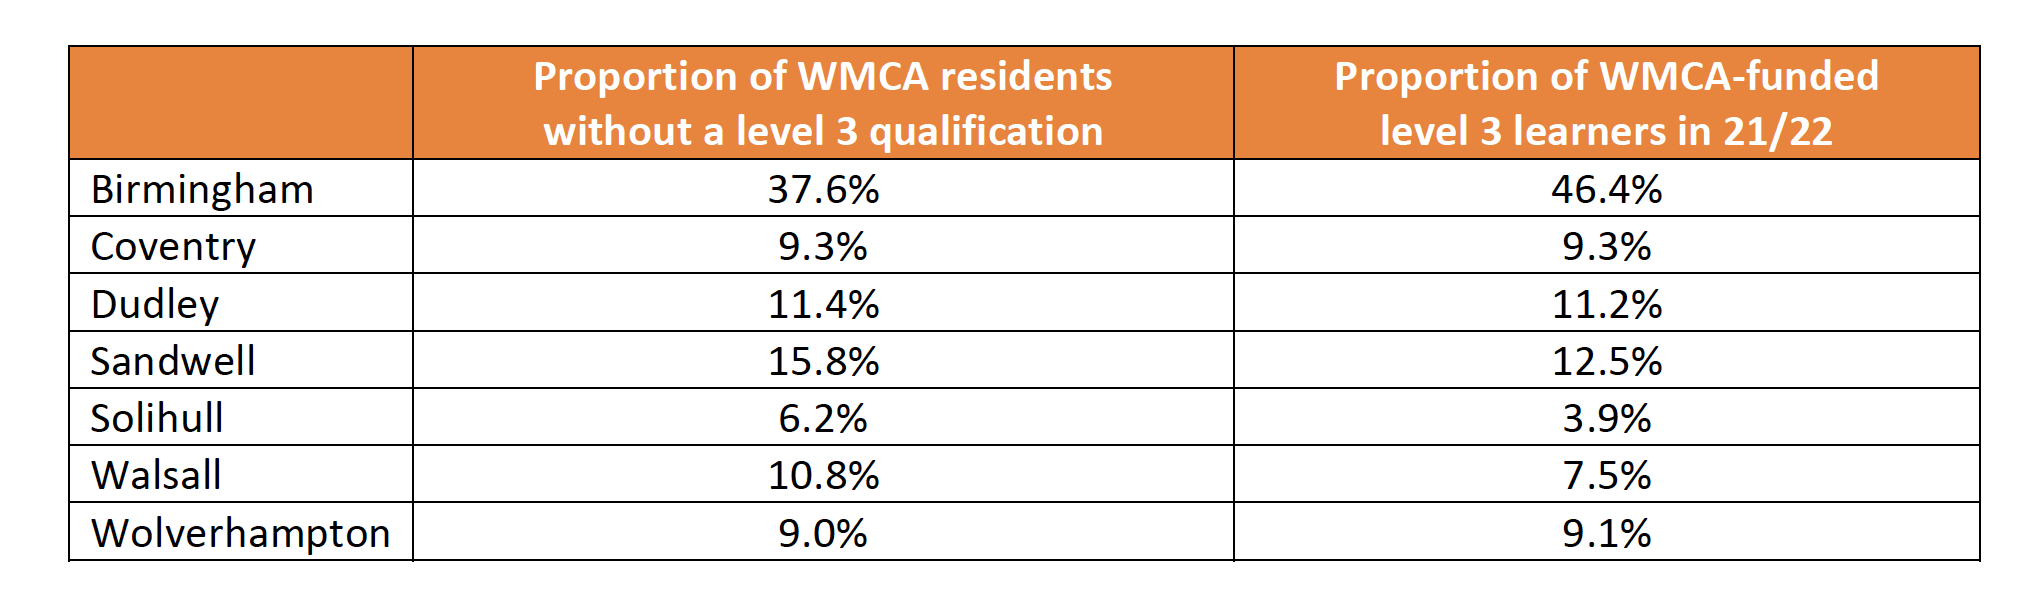 A table showing the Proportion of WMCA residents without a level 3 qualification, as well as the Proportion of WMCA-funded level 3 learners in 21/22 across the 7 WMCA areas.